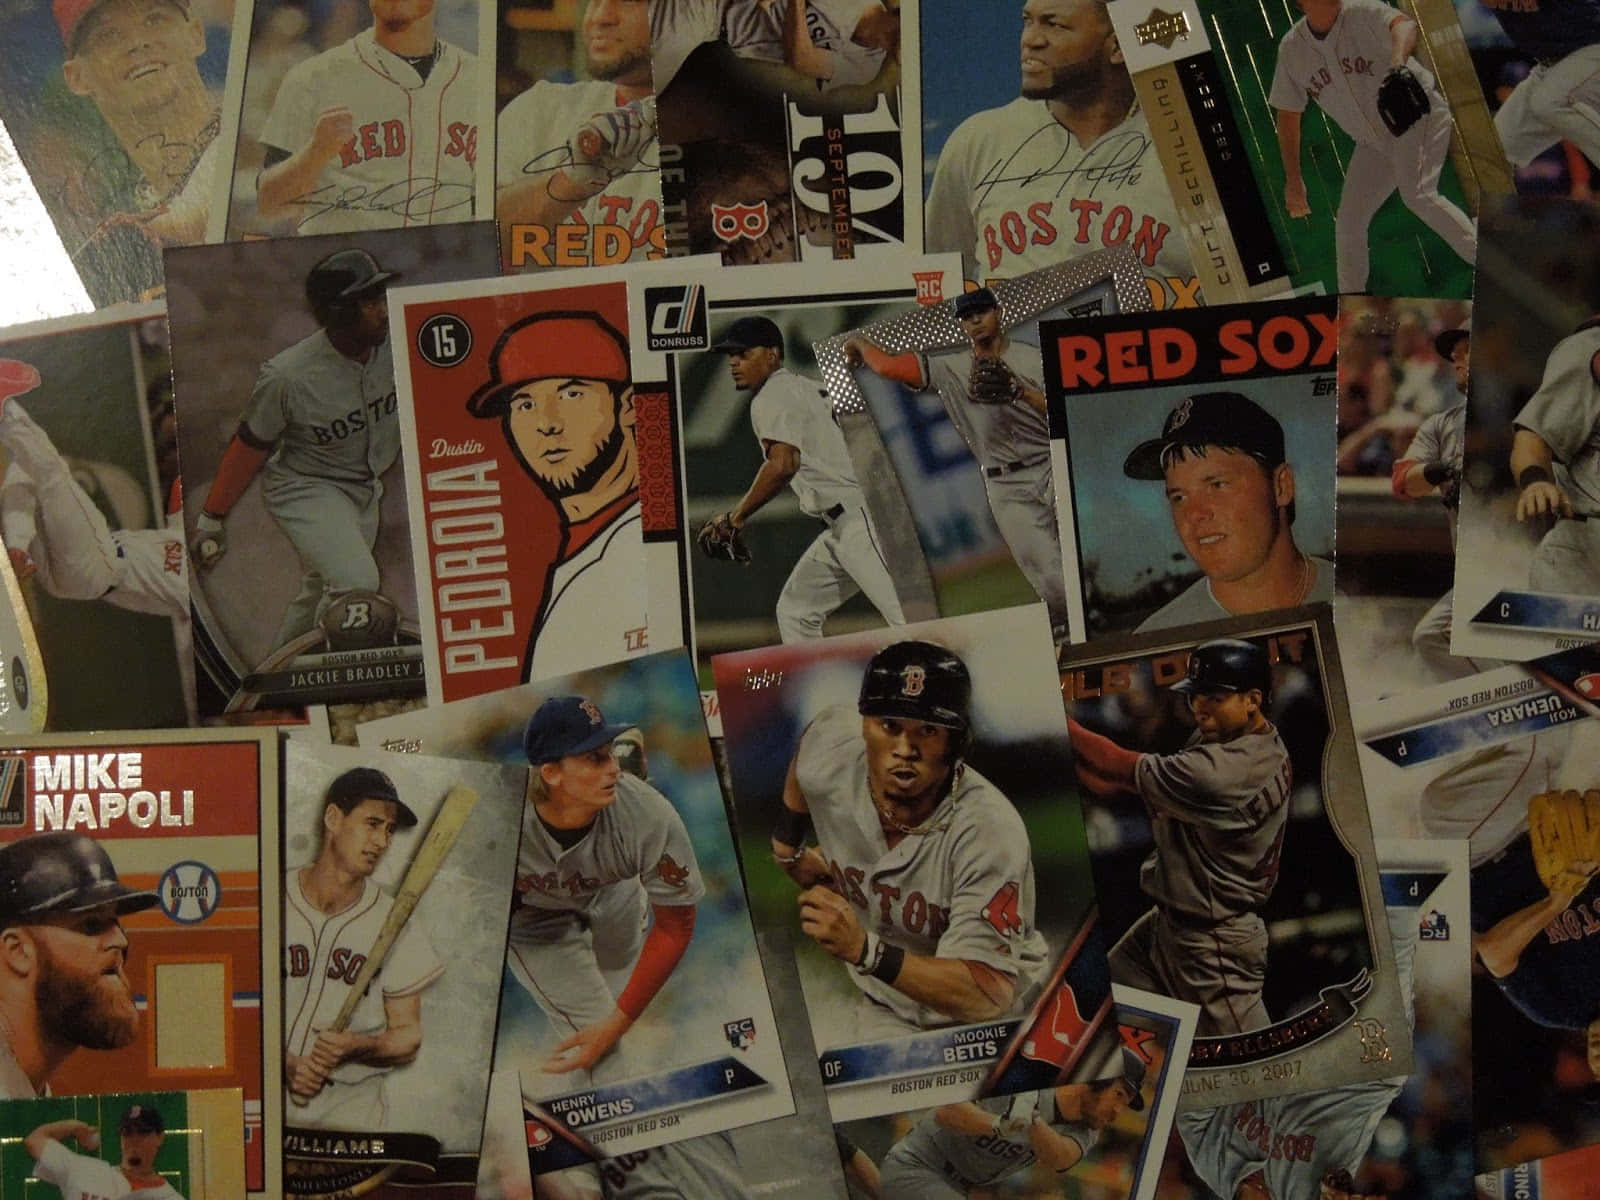 A stunning collection of vintage baseball cards on display Wallpaper